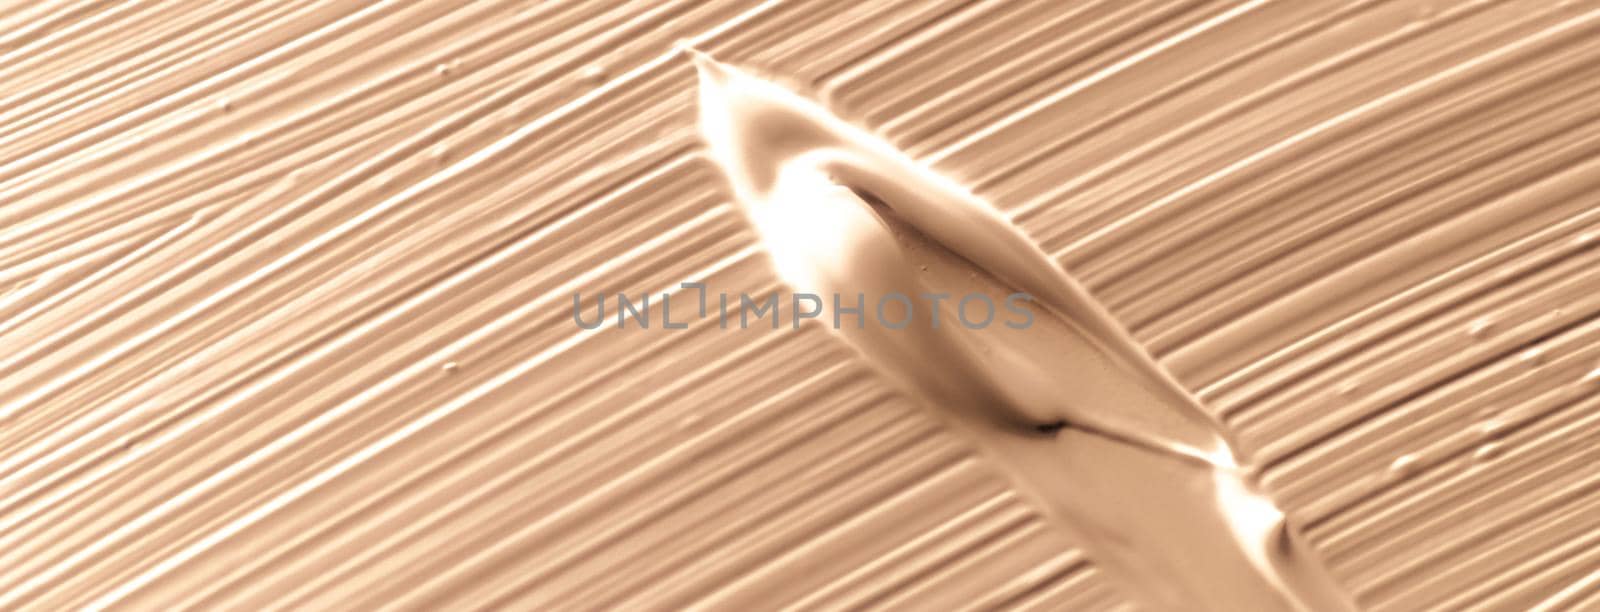 Art, branding and makeup concept - Cosmetics abstract texture background, beige acrylic paint brush stroke, textured cream product as make-up backdrop for luxury beauty brand, holiday banner design